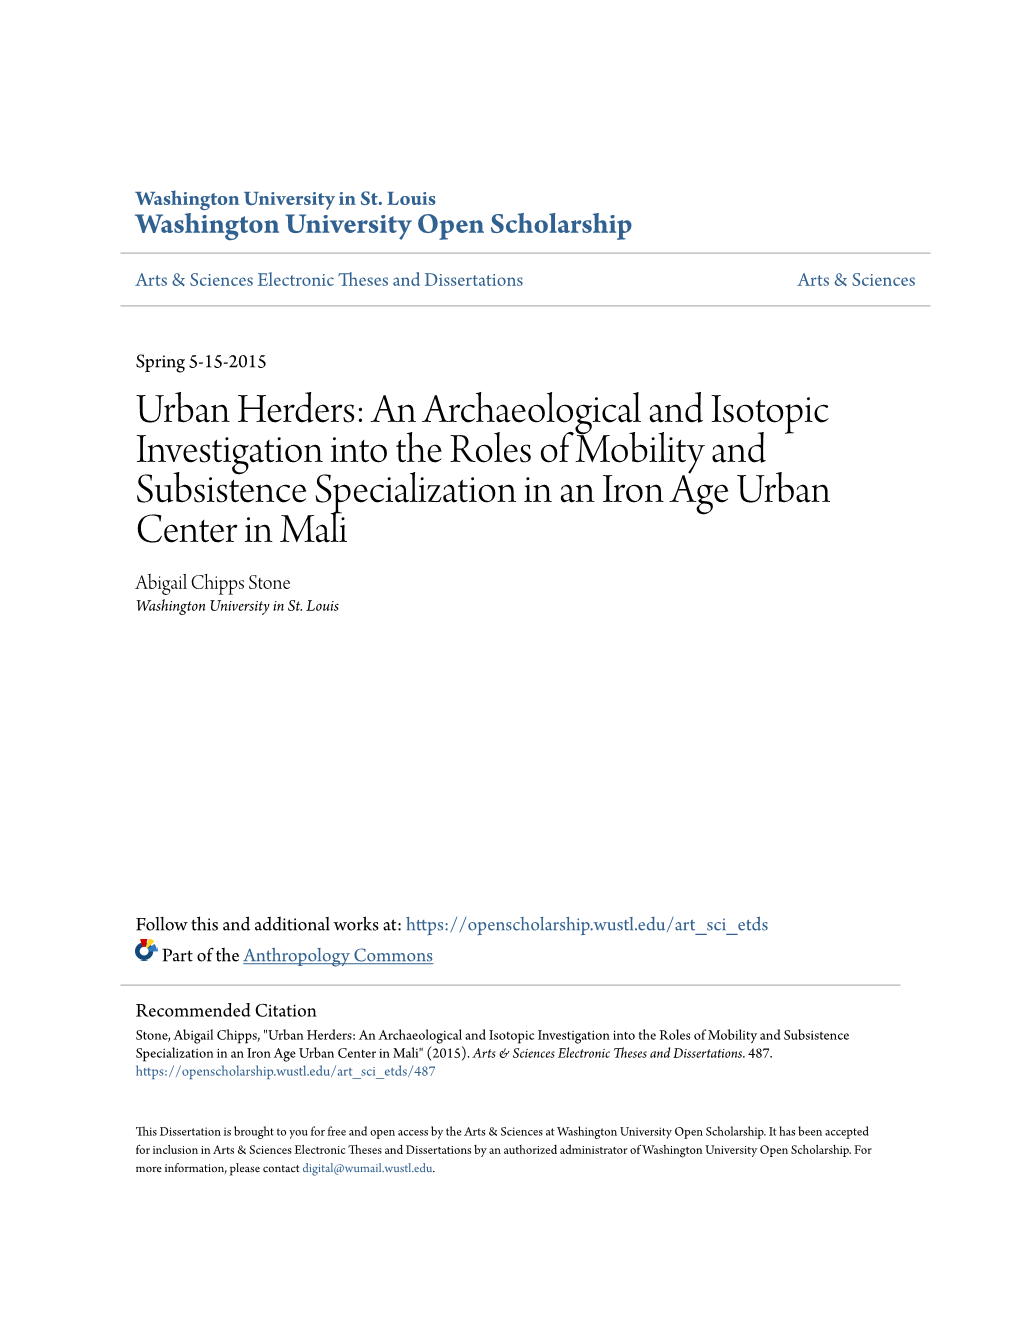 Urban Herders: an Archaeological and Isotopic Investigation Into The